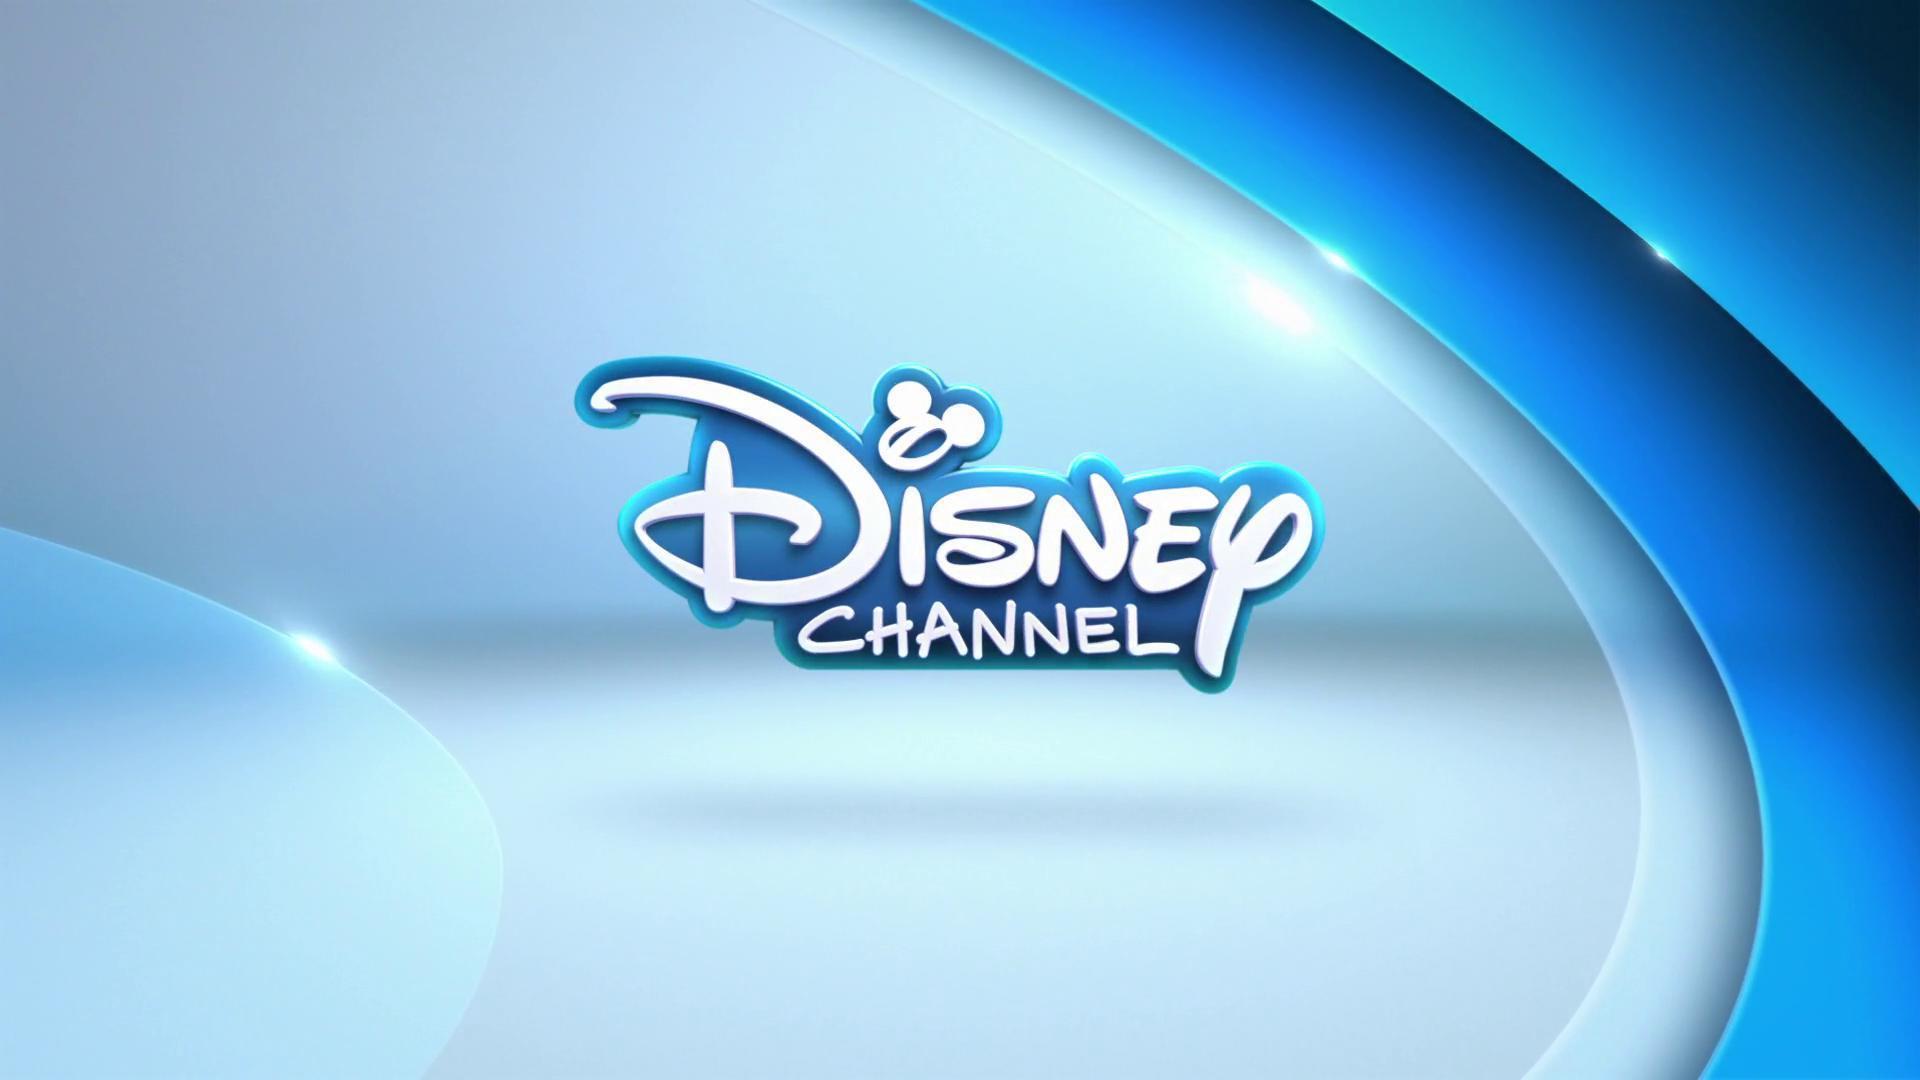 Disney Channel Wallpapers - Wallpaper Cave